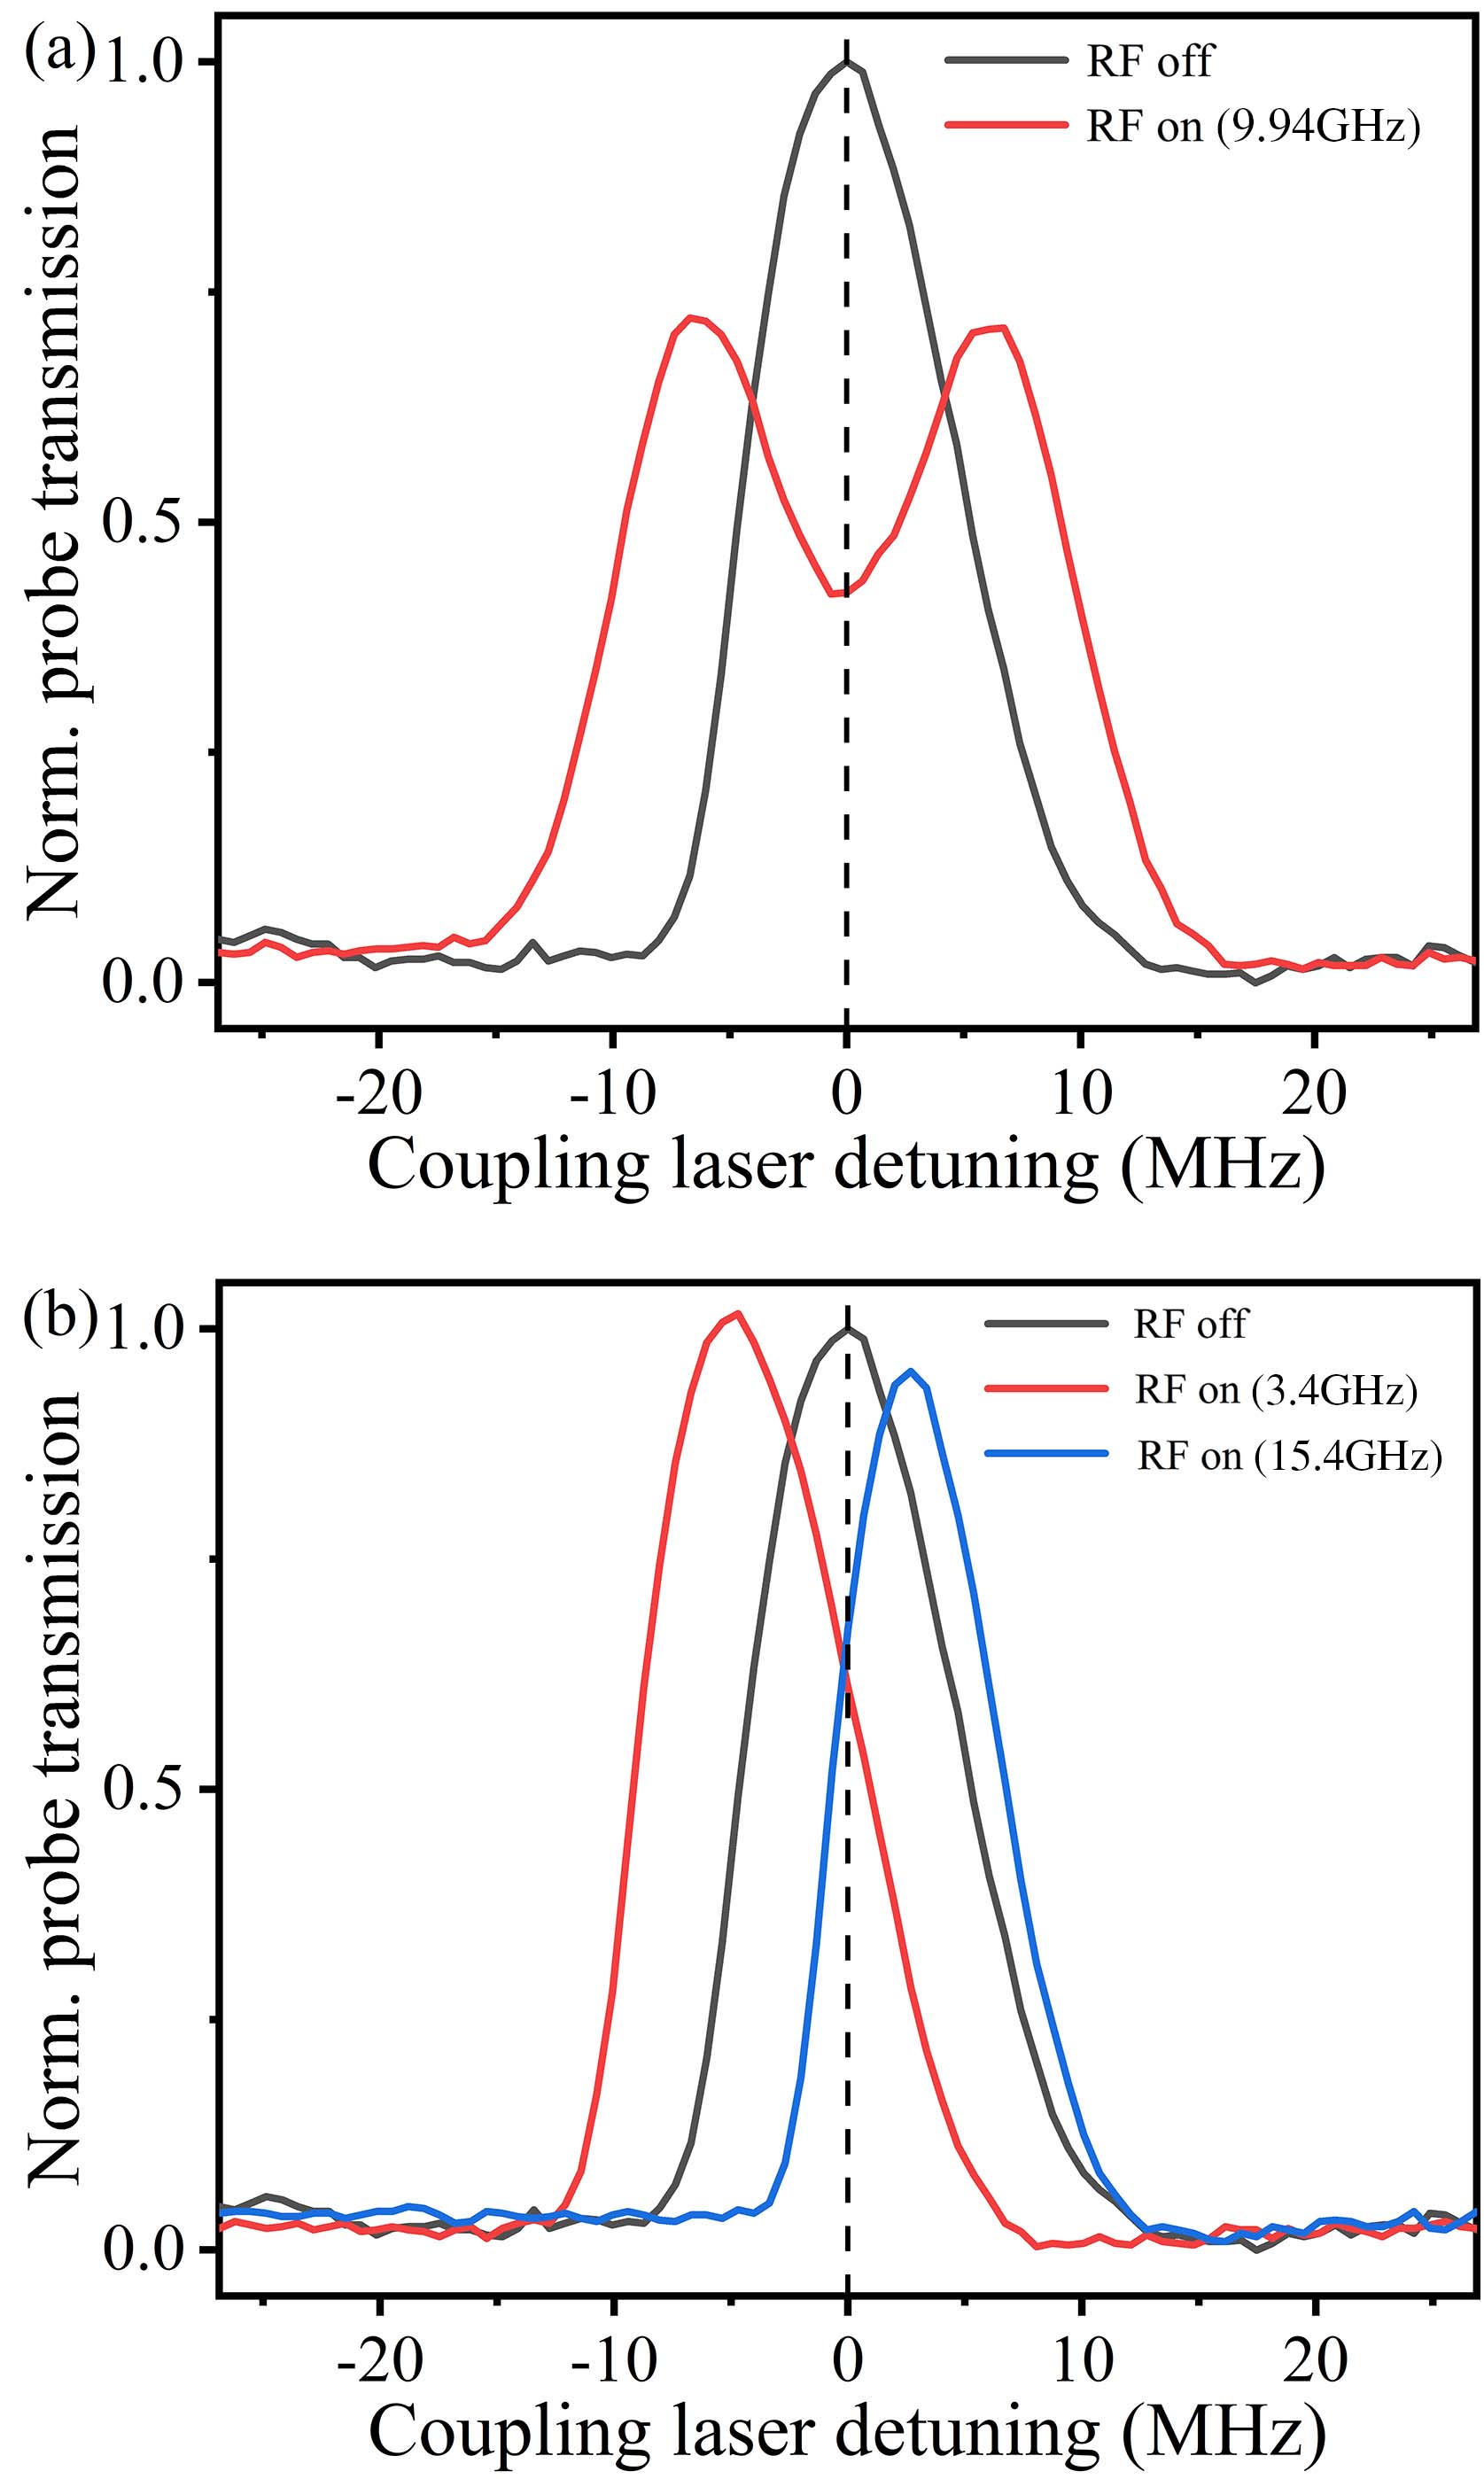 Illustration of the normalized probe transmission signal as a function of coupling laser detuning. (a) On-resonance EIT spectra with (red curve) and without (black curve) RF field. The RF field frequency is 9.94 GHz. (b) Off-resonance EIT spectra with (red and blue curves) and without (black curve) RF field. The RF field frequencies are 3.4 GHz (red curve) and 15.4 GHz (blue curve).